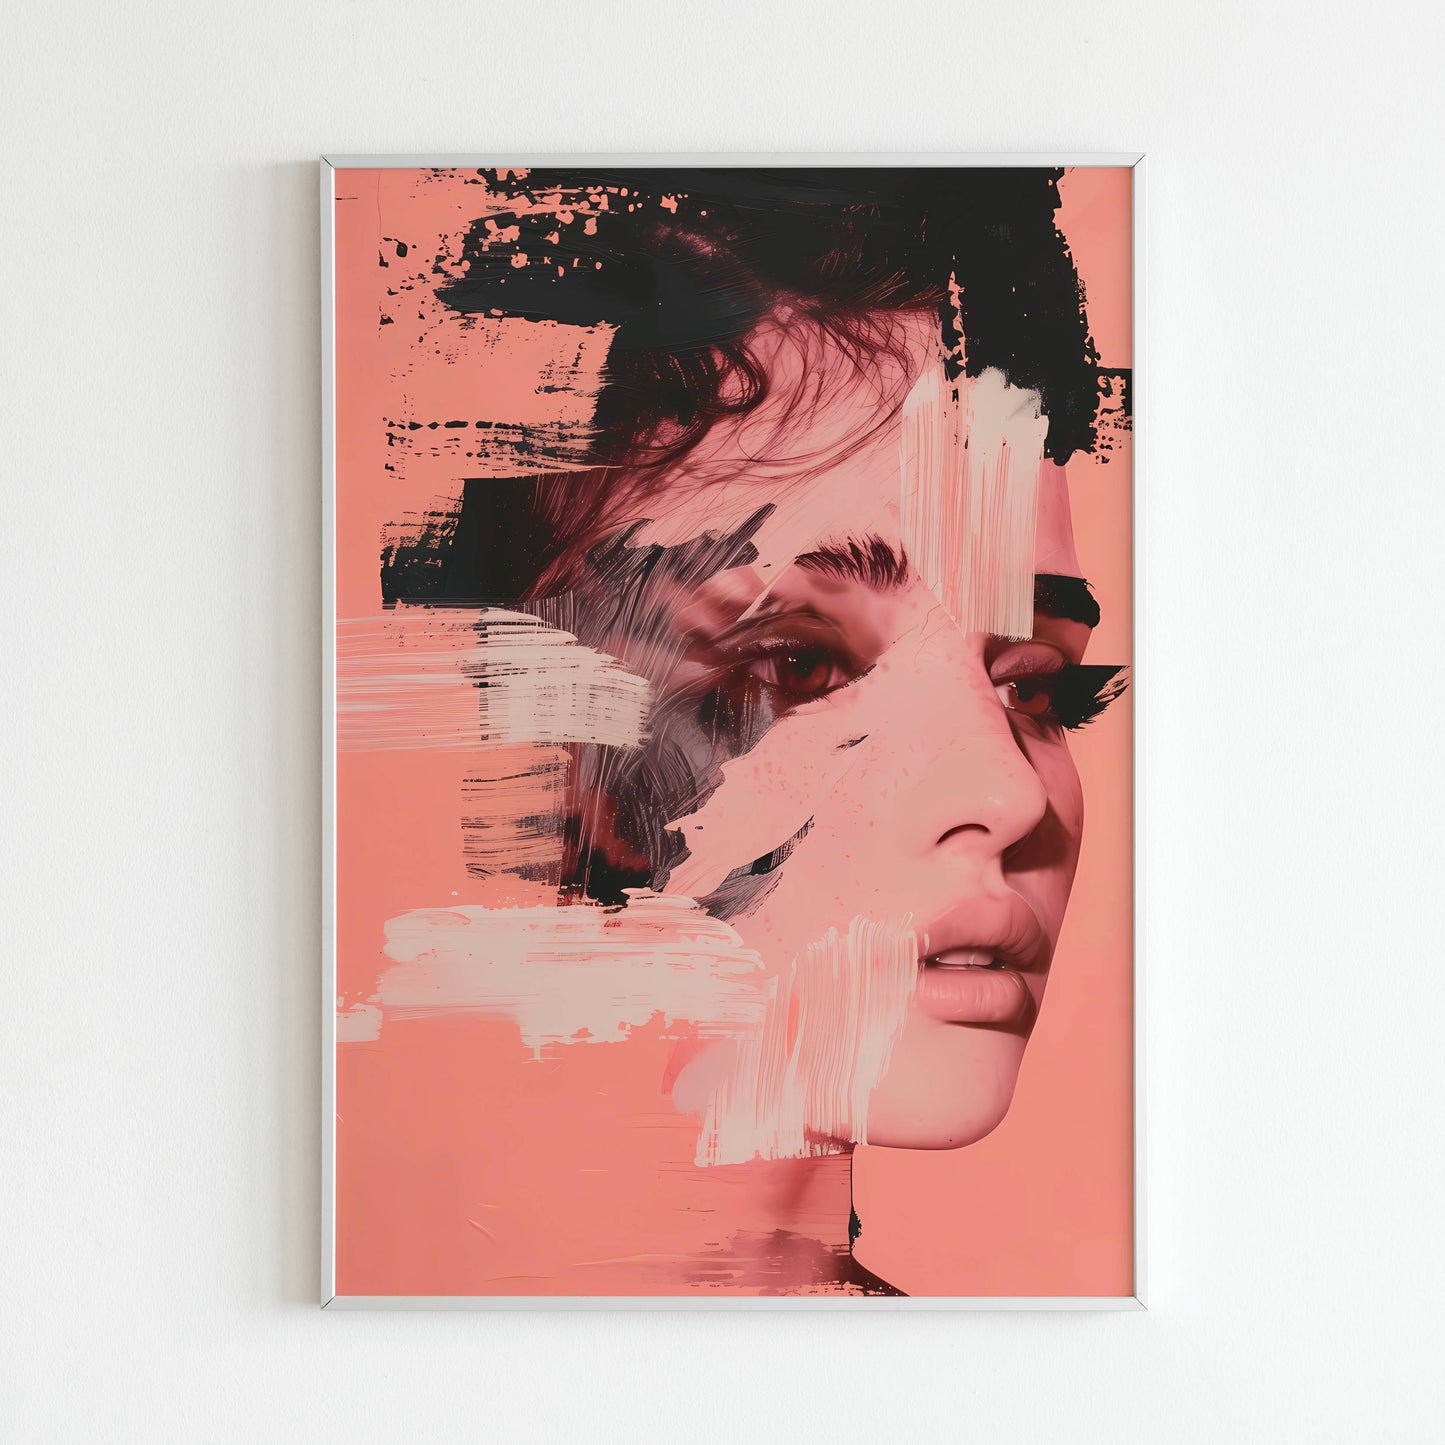 Brushstrokes Portrait - Printed Wall Art / Poster. This unique portrait poster adds a touch of artistic flair to your space. Arrives ready to hang.